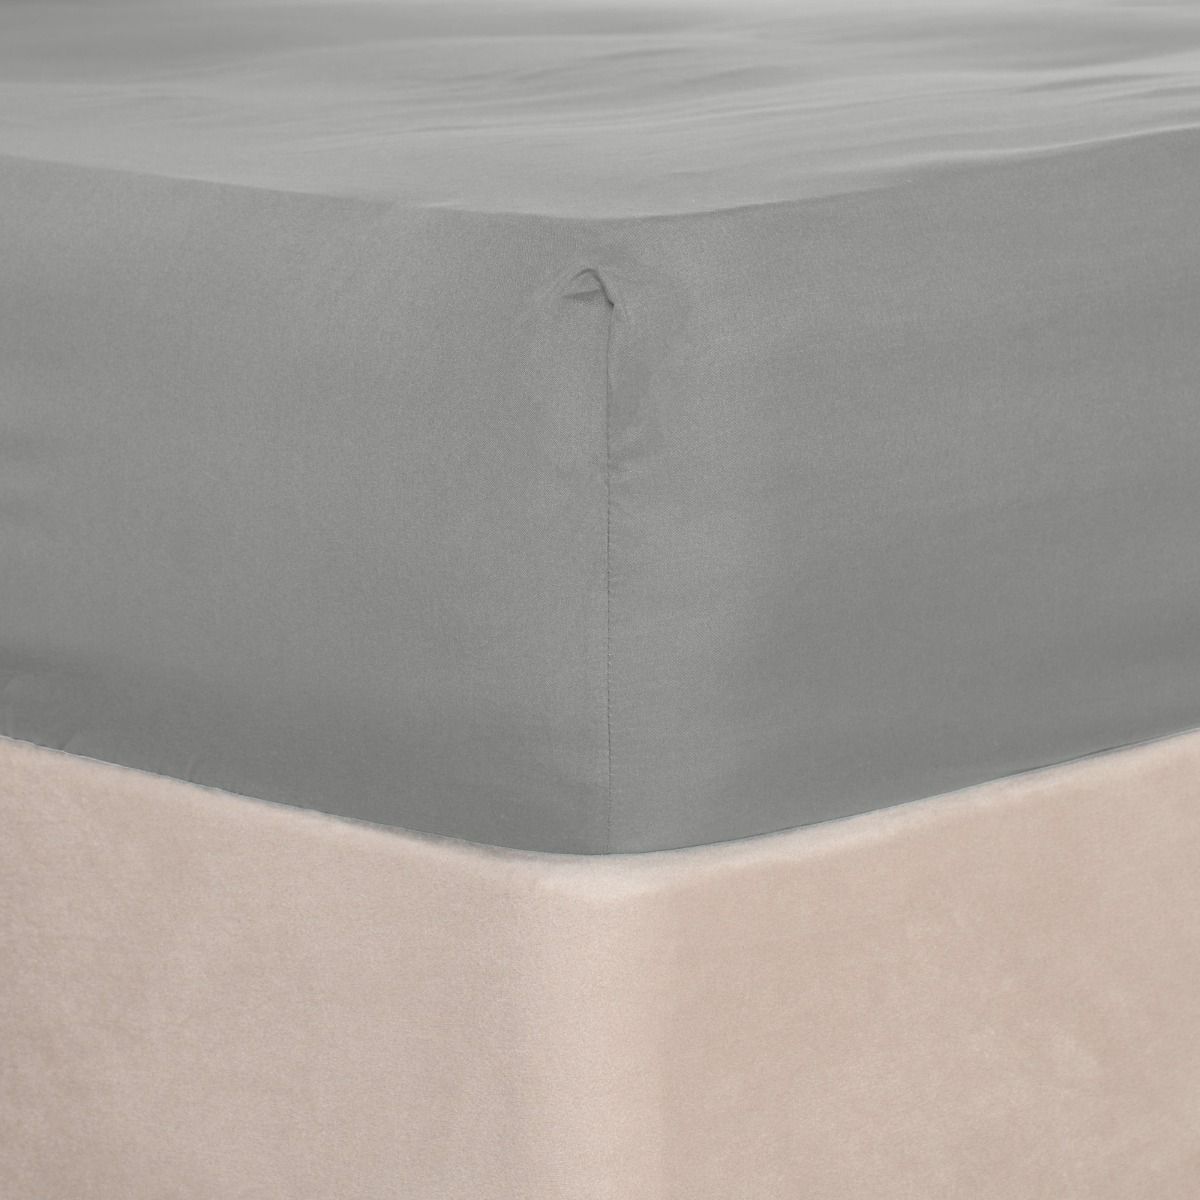 Brentfords Plain Dyed Fitted Sheet - Grey